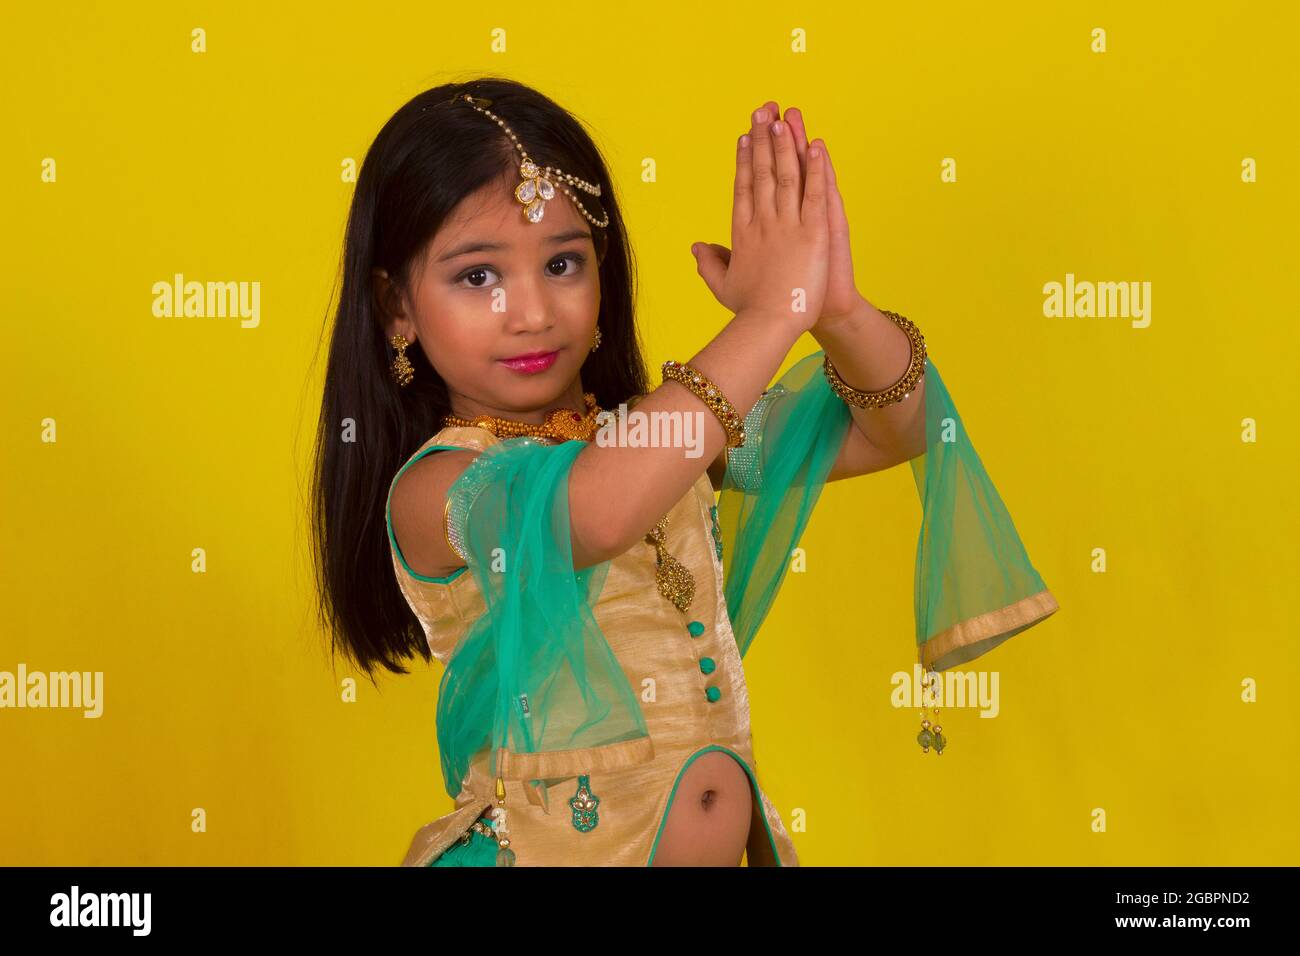 Free Photos - A Little Girl Dressed In A Traditional Indian Outfit